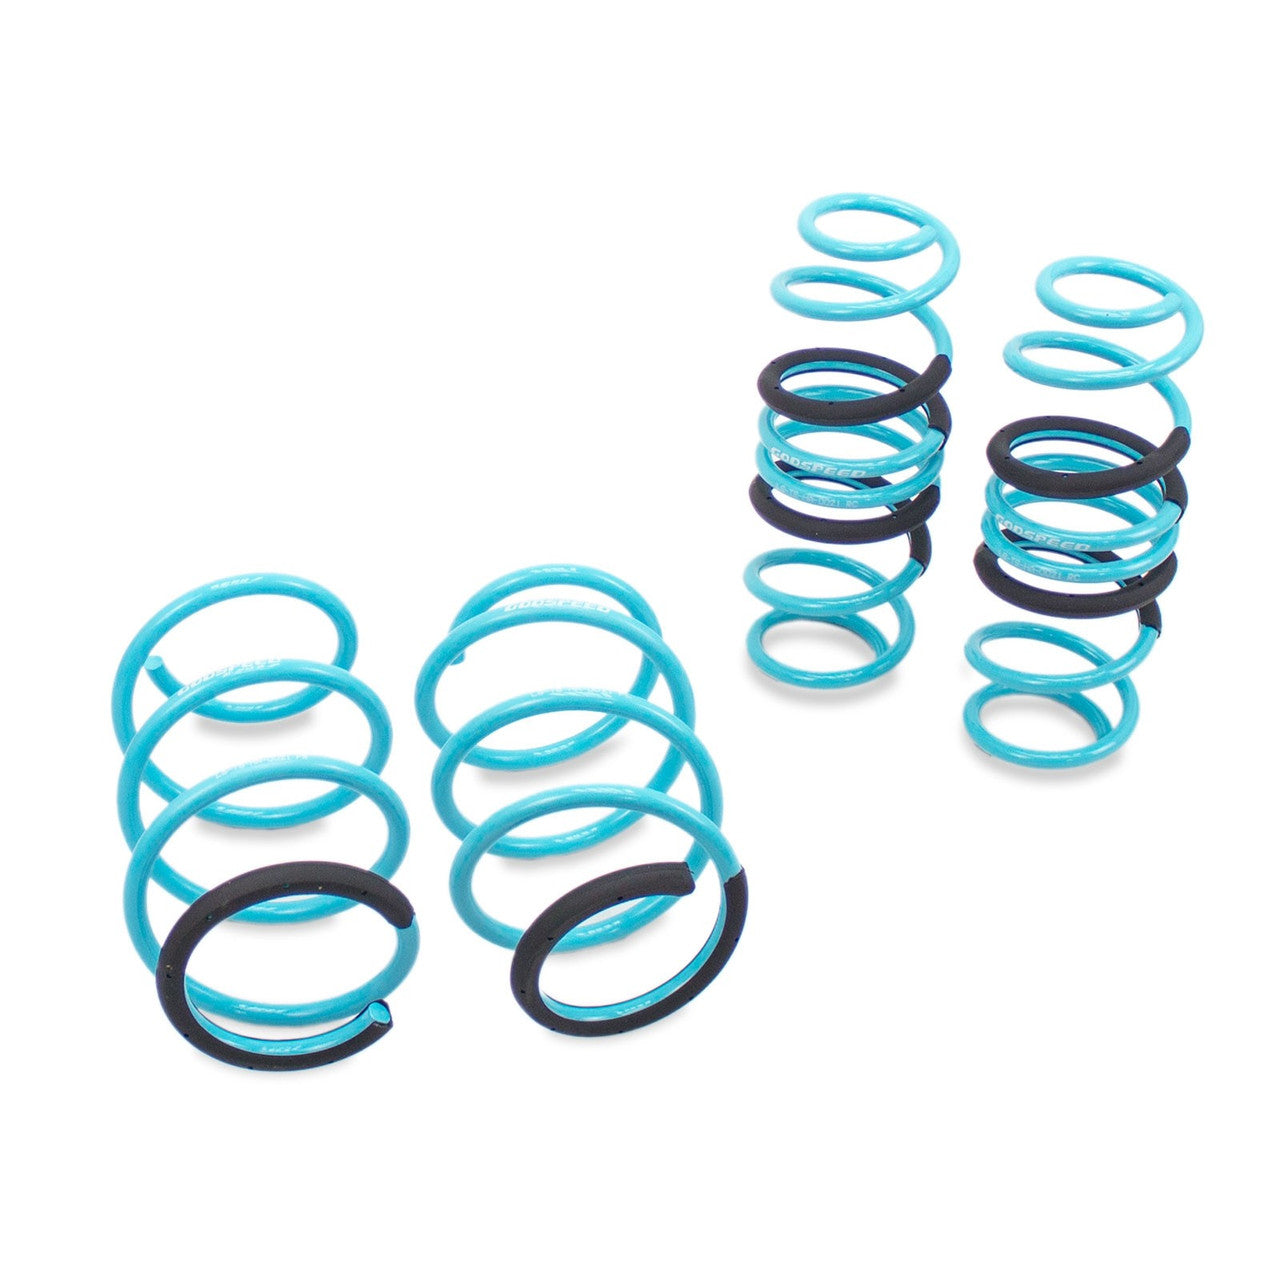 HONDA CIVIC (FC)10th Gen Godspeed TRACTION-S™ PERFORMANCE LOWERING SPRINGS